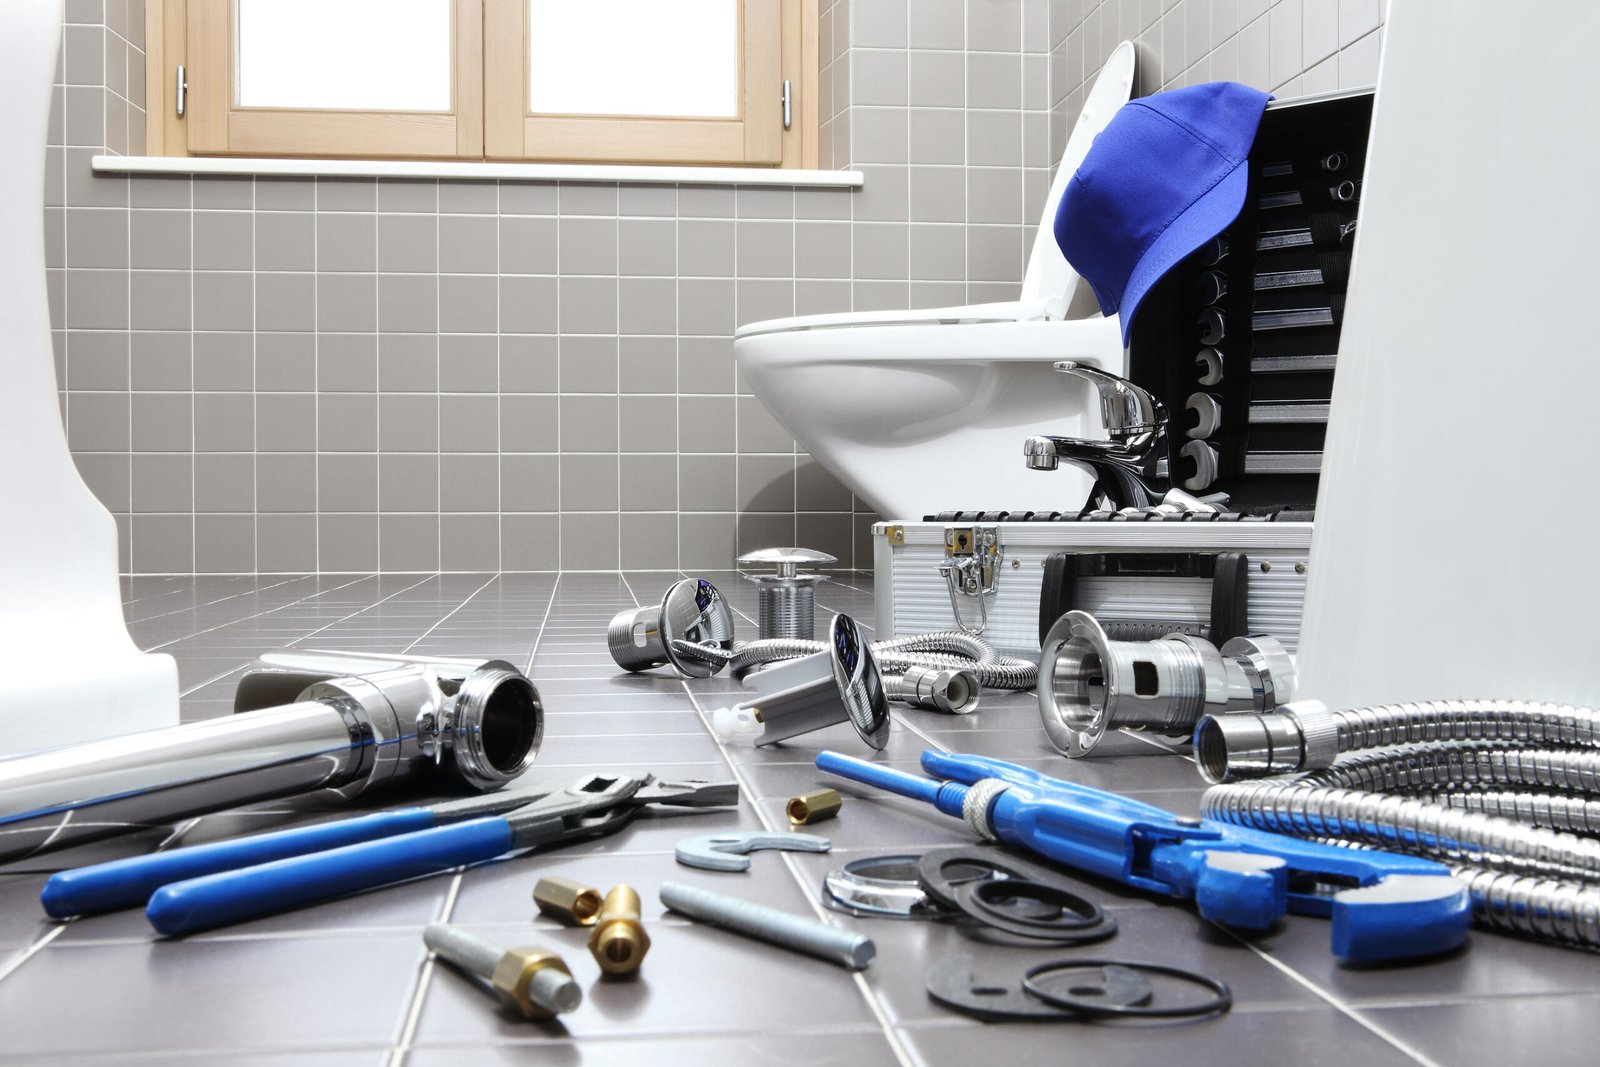 Finding Reliable Local Plumbing Services Near You